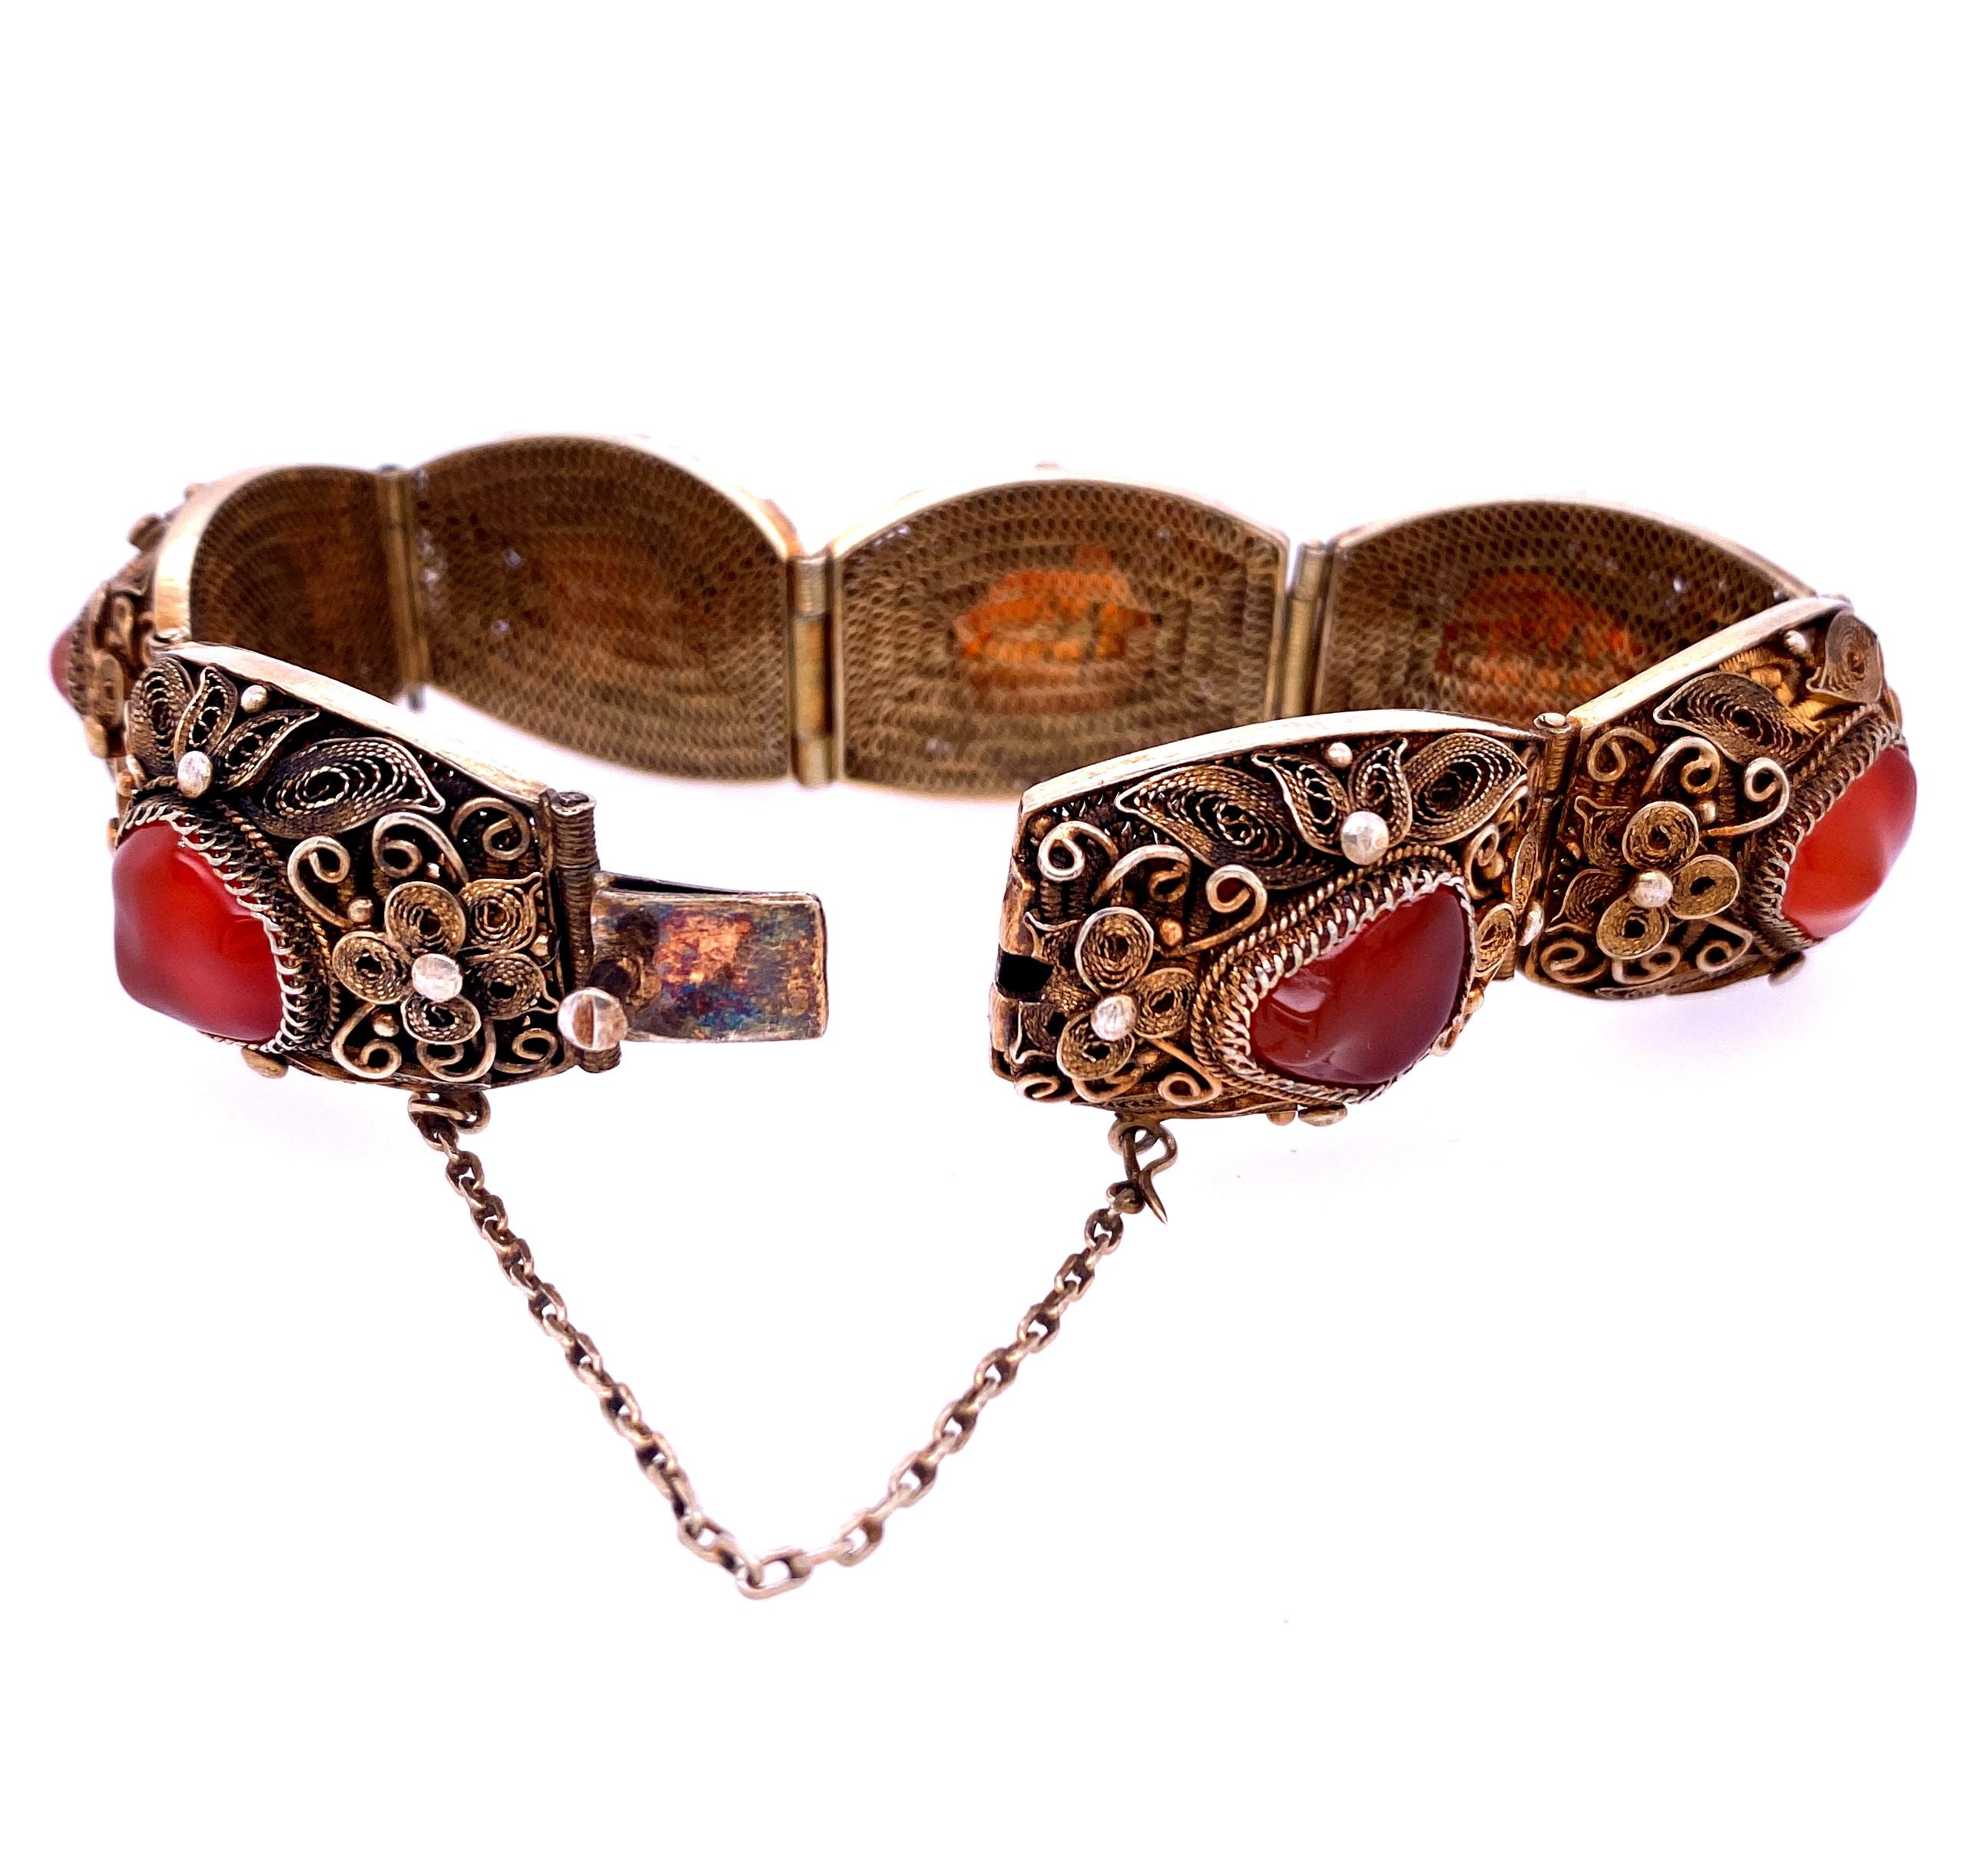 One sterling silver (stamped Z11 SILVER) filigree floral motif link bracelet  with cushion shaped links measures 26.5mm x 19mm set with carnelian nuggets measuring approximately 10.7mm x 9mm.  The bracelet measures 8 inches long and has a hidden box